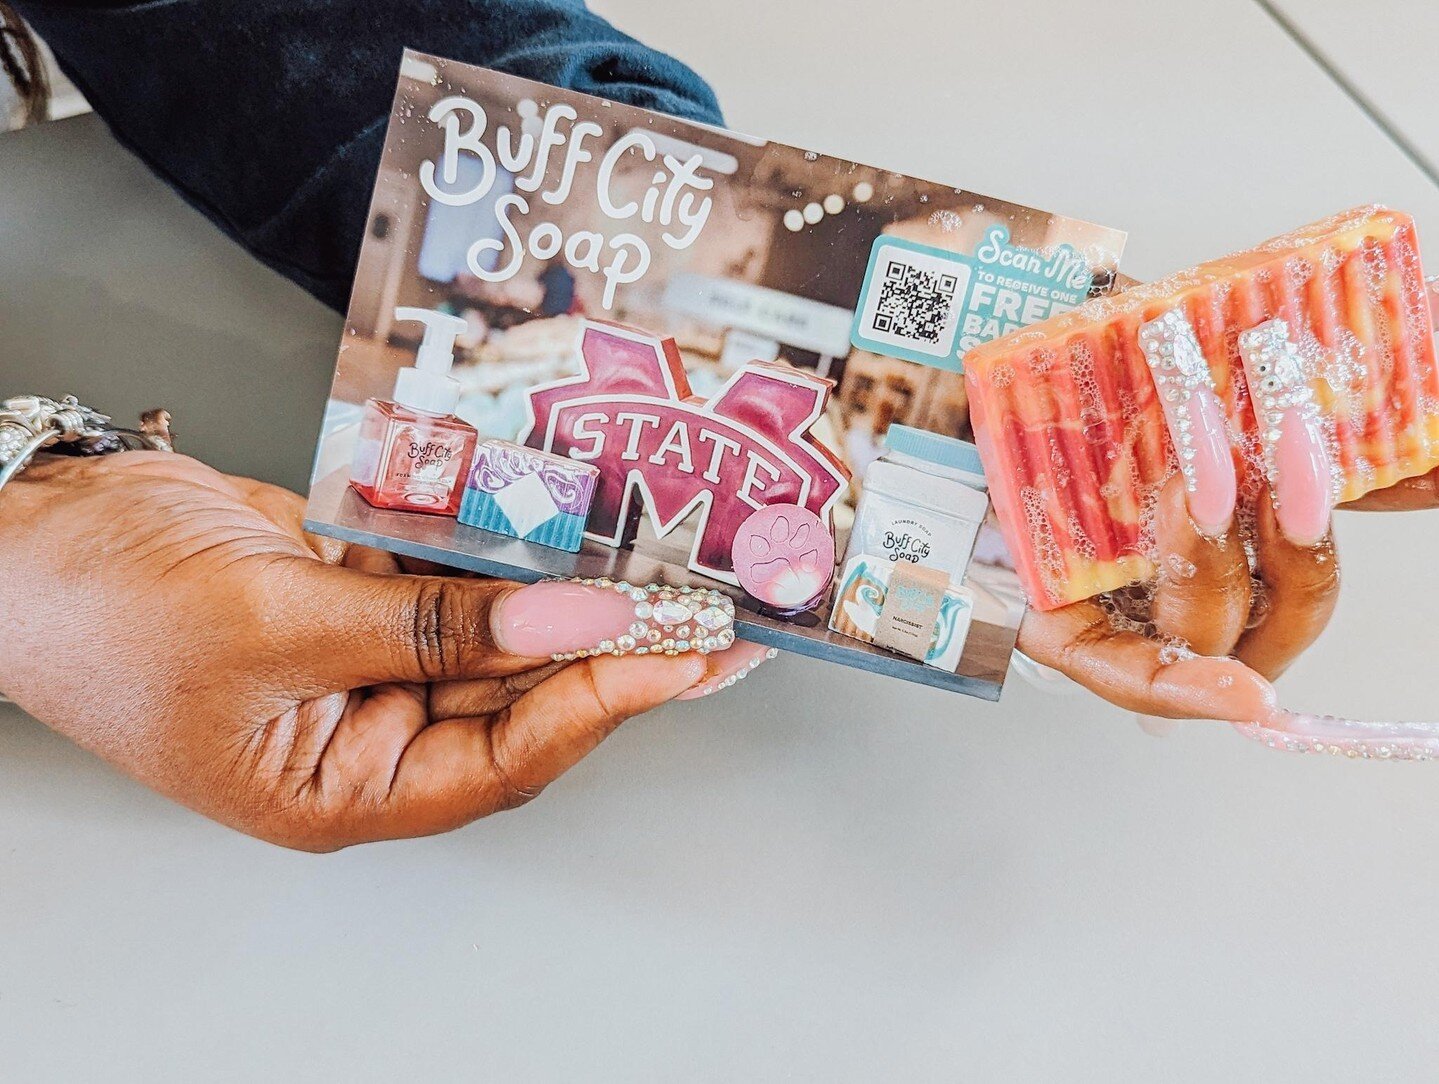 It's WIN-IT-WEDNESDAY!!! Like and tag your favorite @ for a chance to win TWO sample packs from Buff City Soap! Two winners will be announced tomorrow!